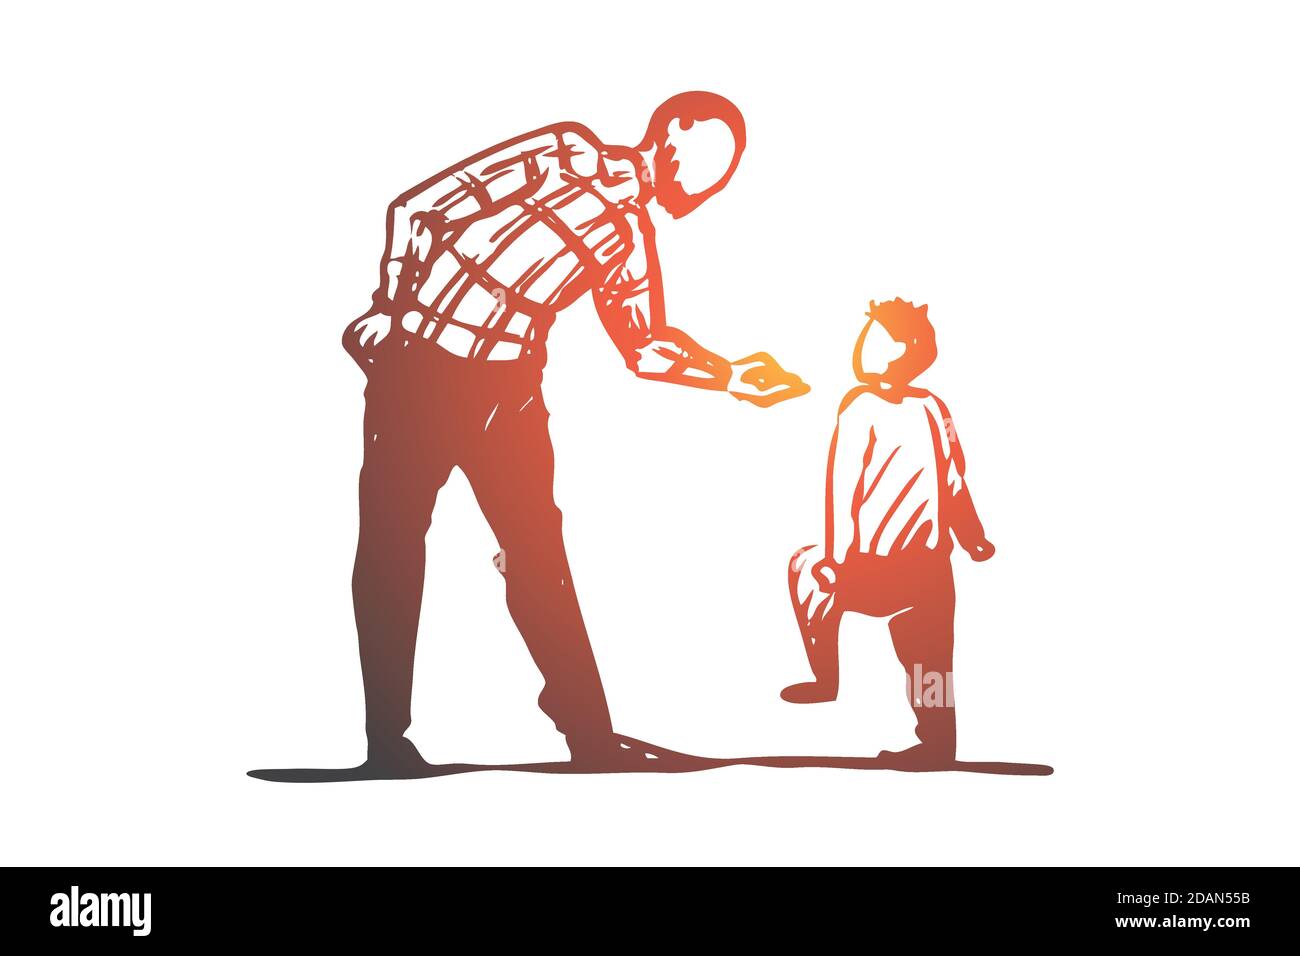 Son, father, angry, scold, conflict concept. Hand drawn isolated vector. Stock Vector